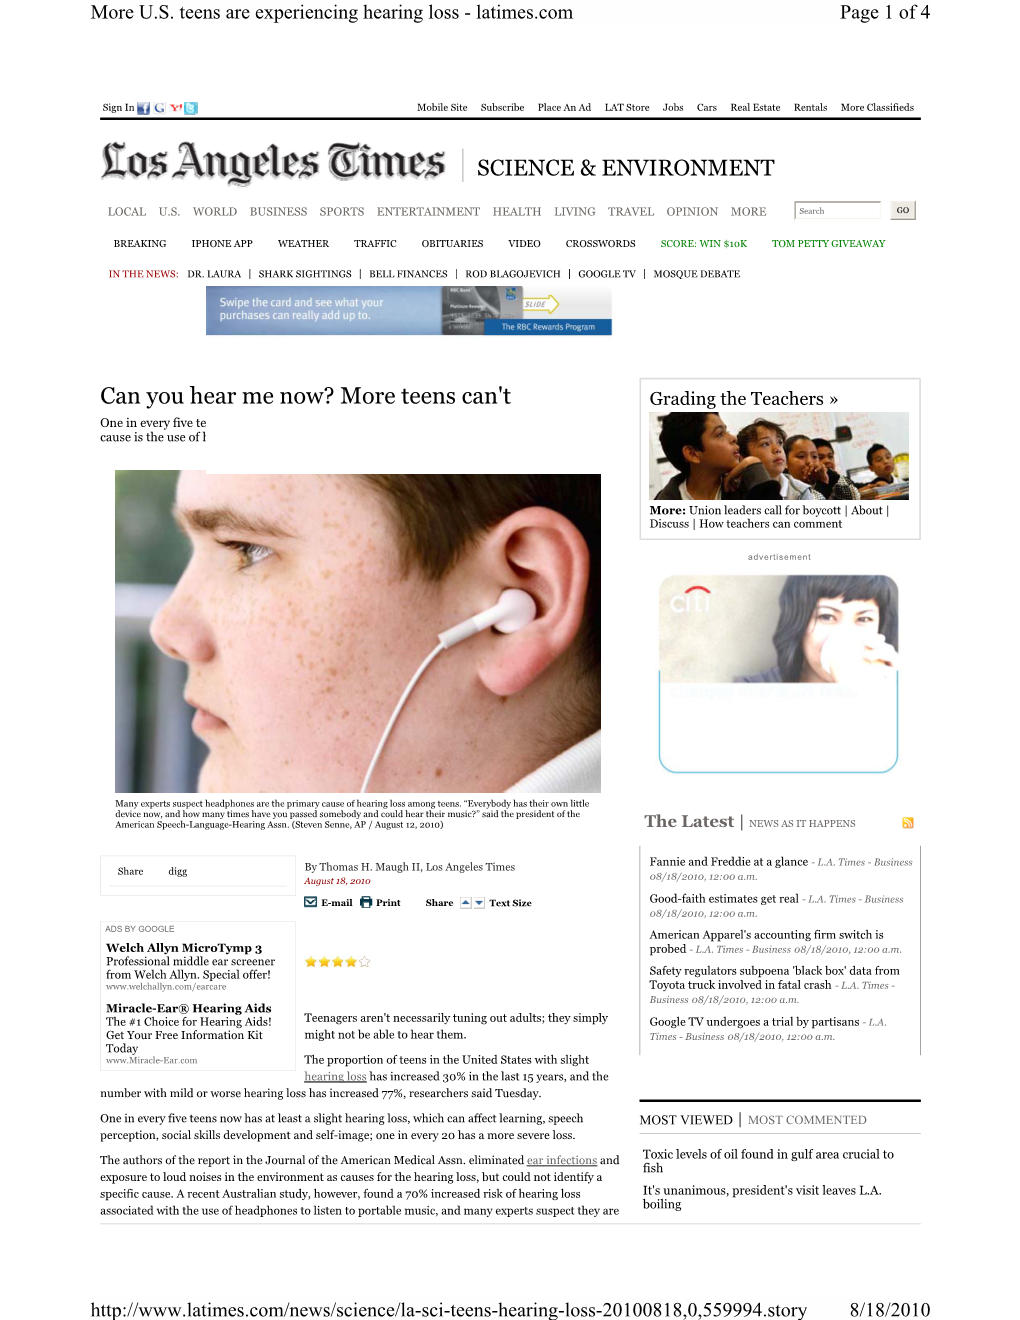 L.A. Times Article on Hearing Loss